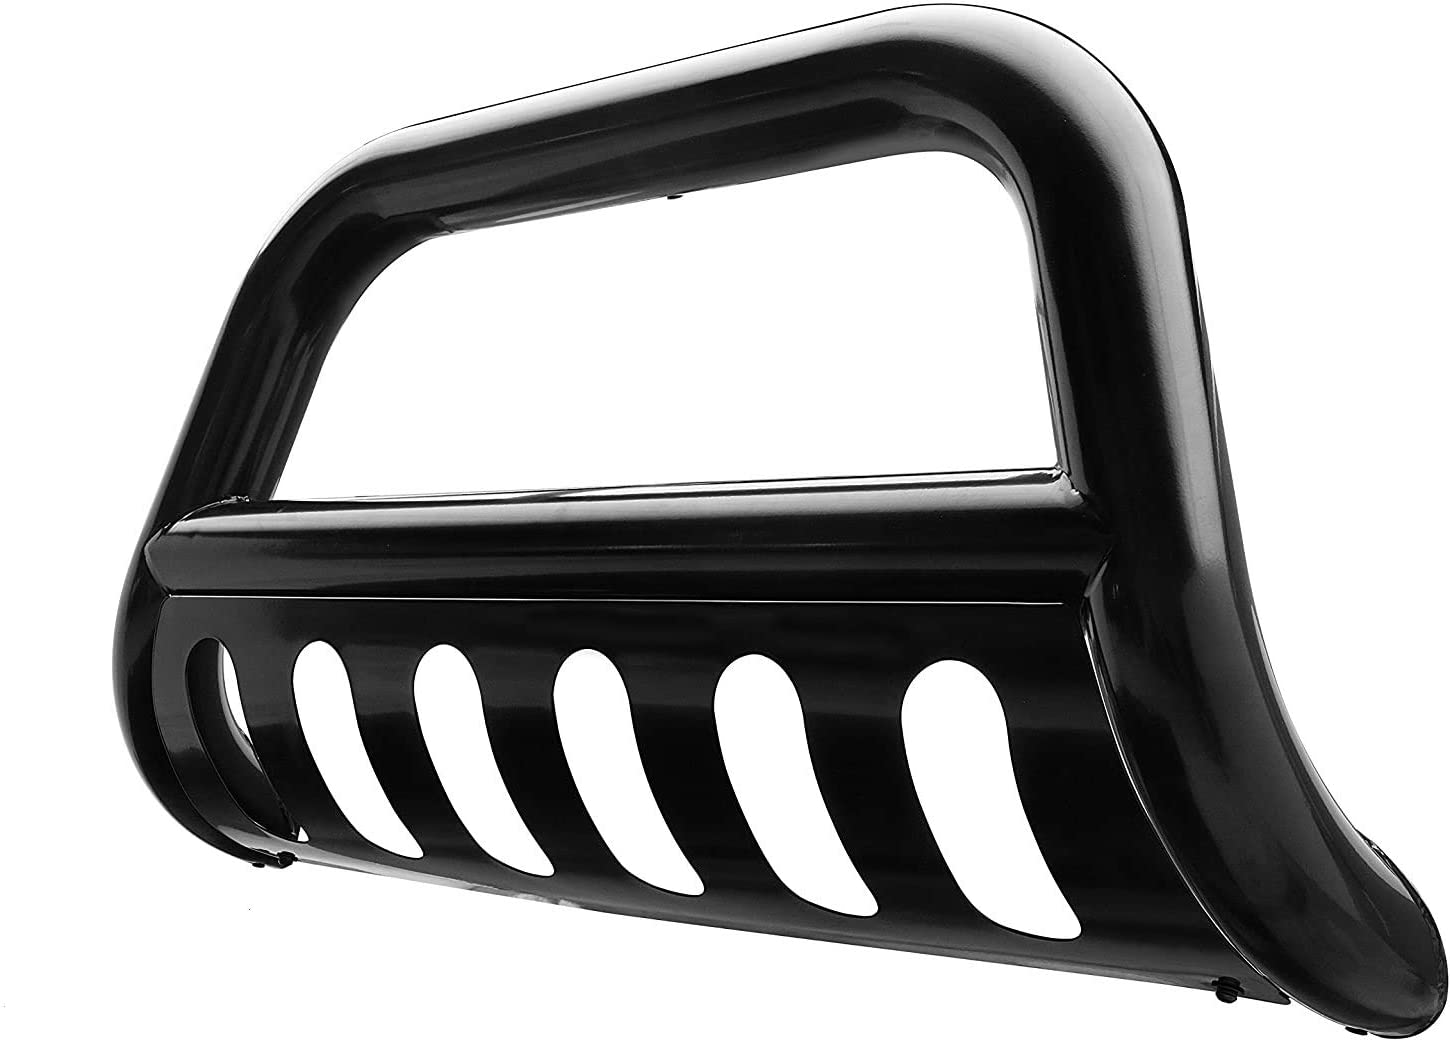 Topline Autopart Black Bull Bar Brush Push Front Bumper Grill Grille Guard With Skid Plate For 08-11/12 Ford Escape/Mazda Tribute/Mercury Mariner 06-10 Mercury Mountaineer 